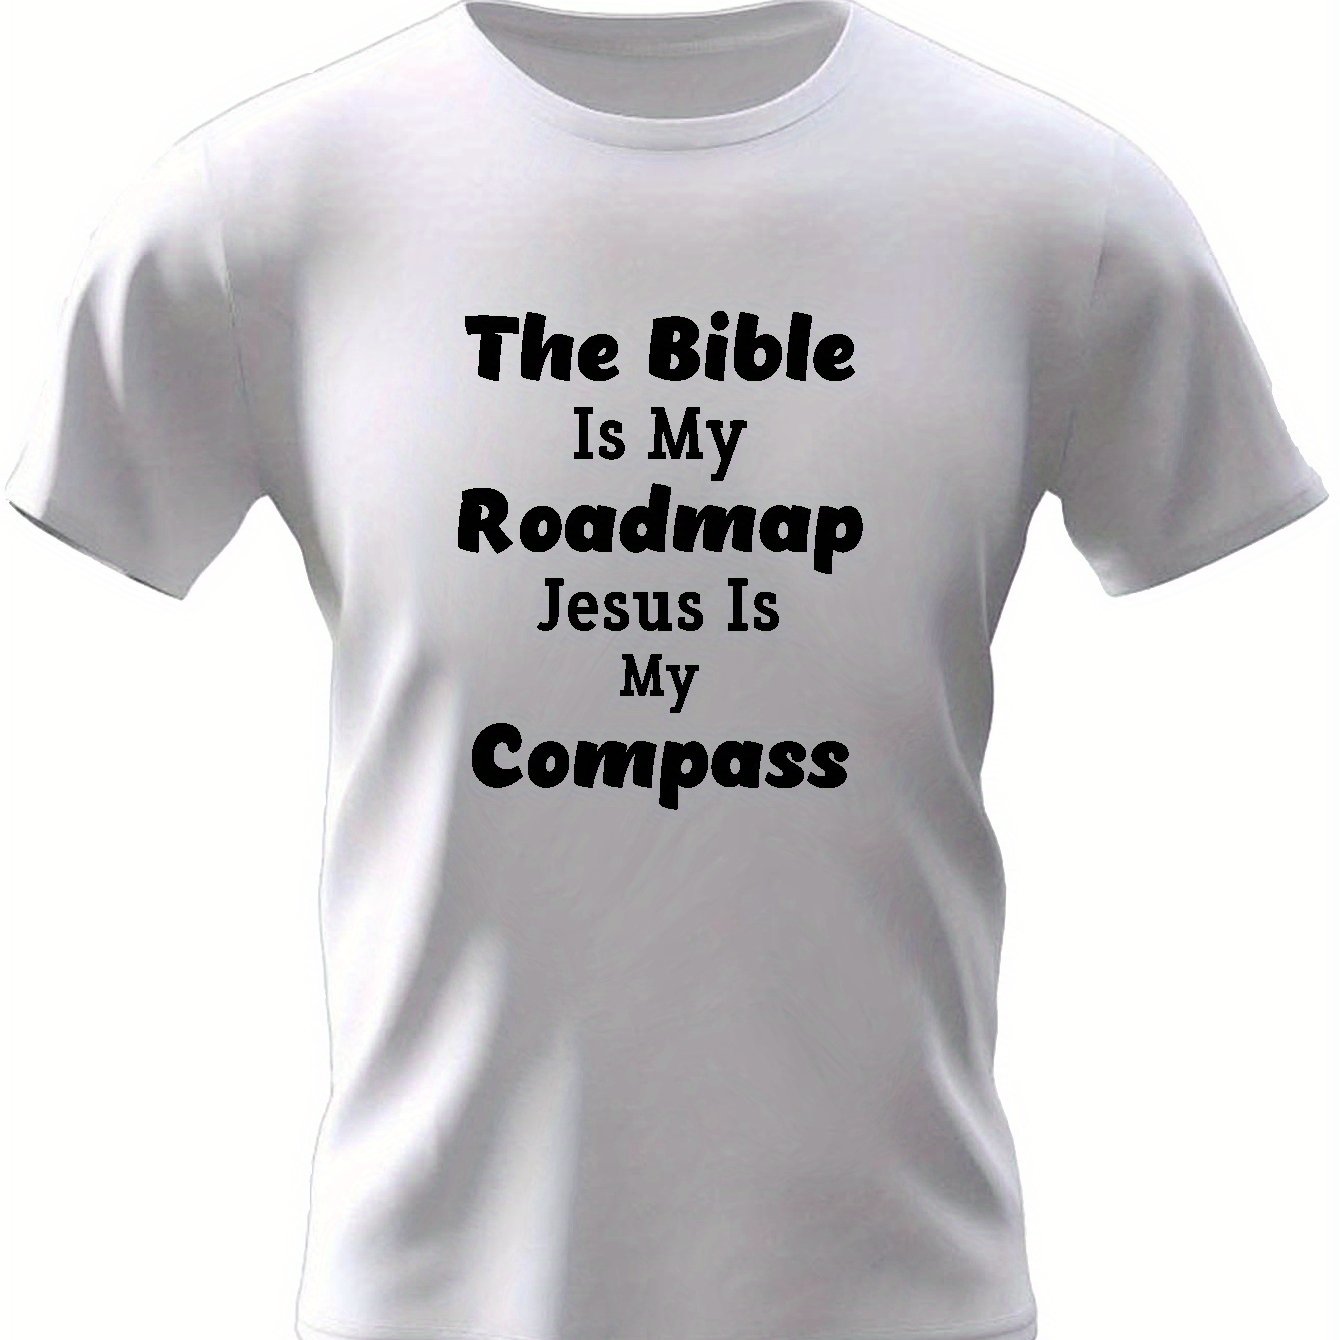 The Bible Is My Roadmap And Jesus Is My Compass  Men's Christian T-shirt claimedbygoddesigns